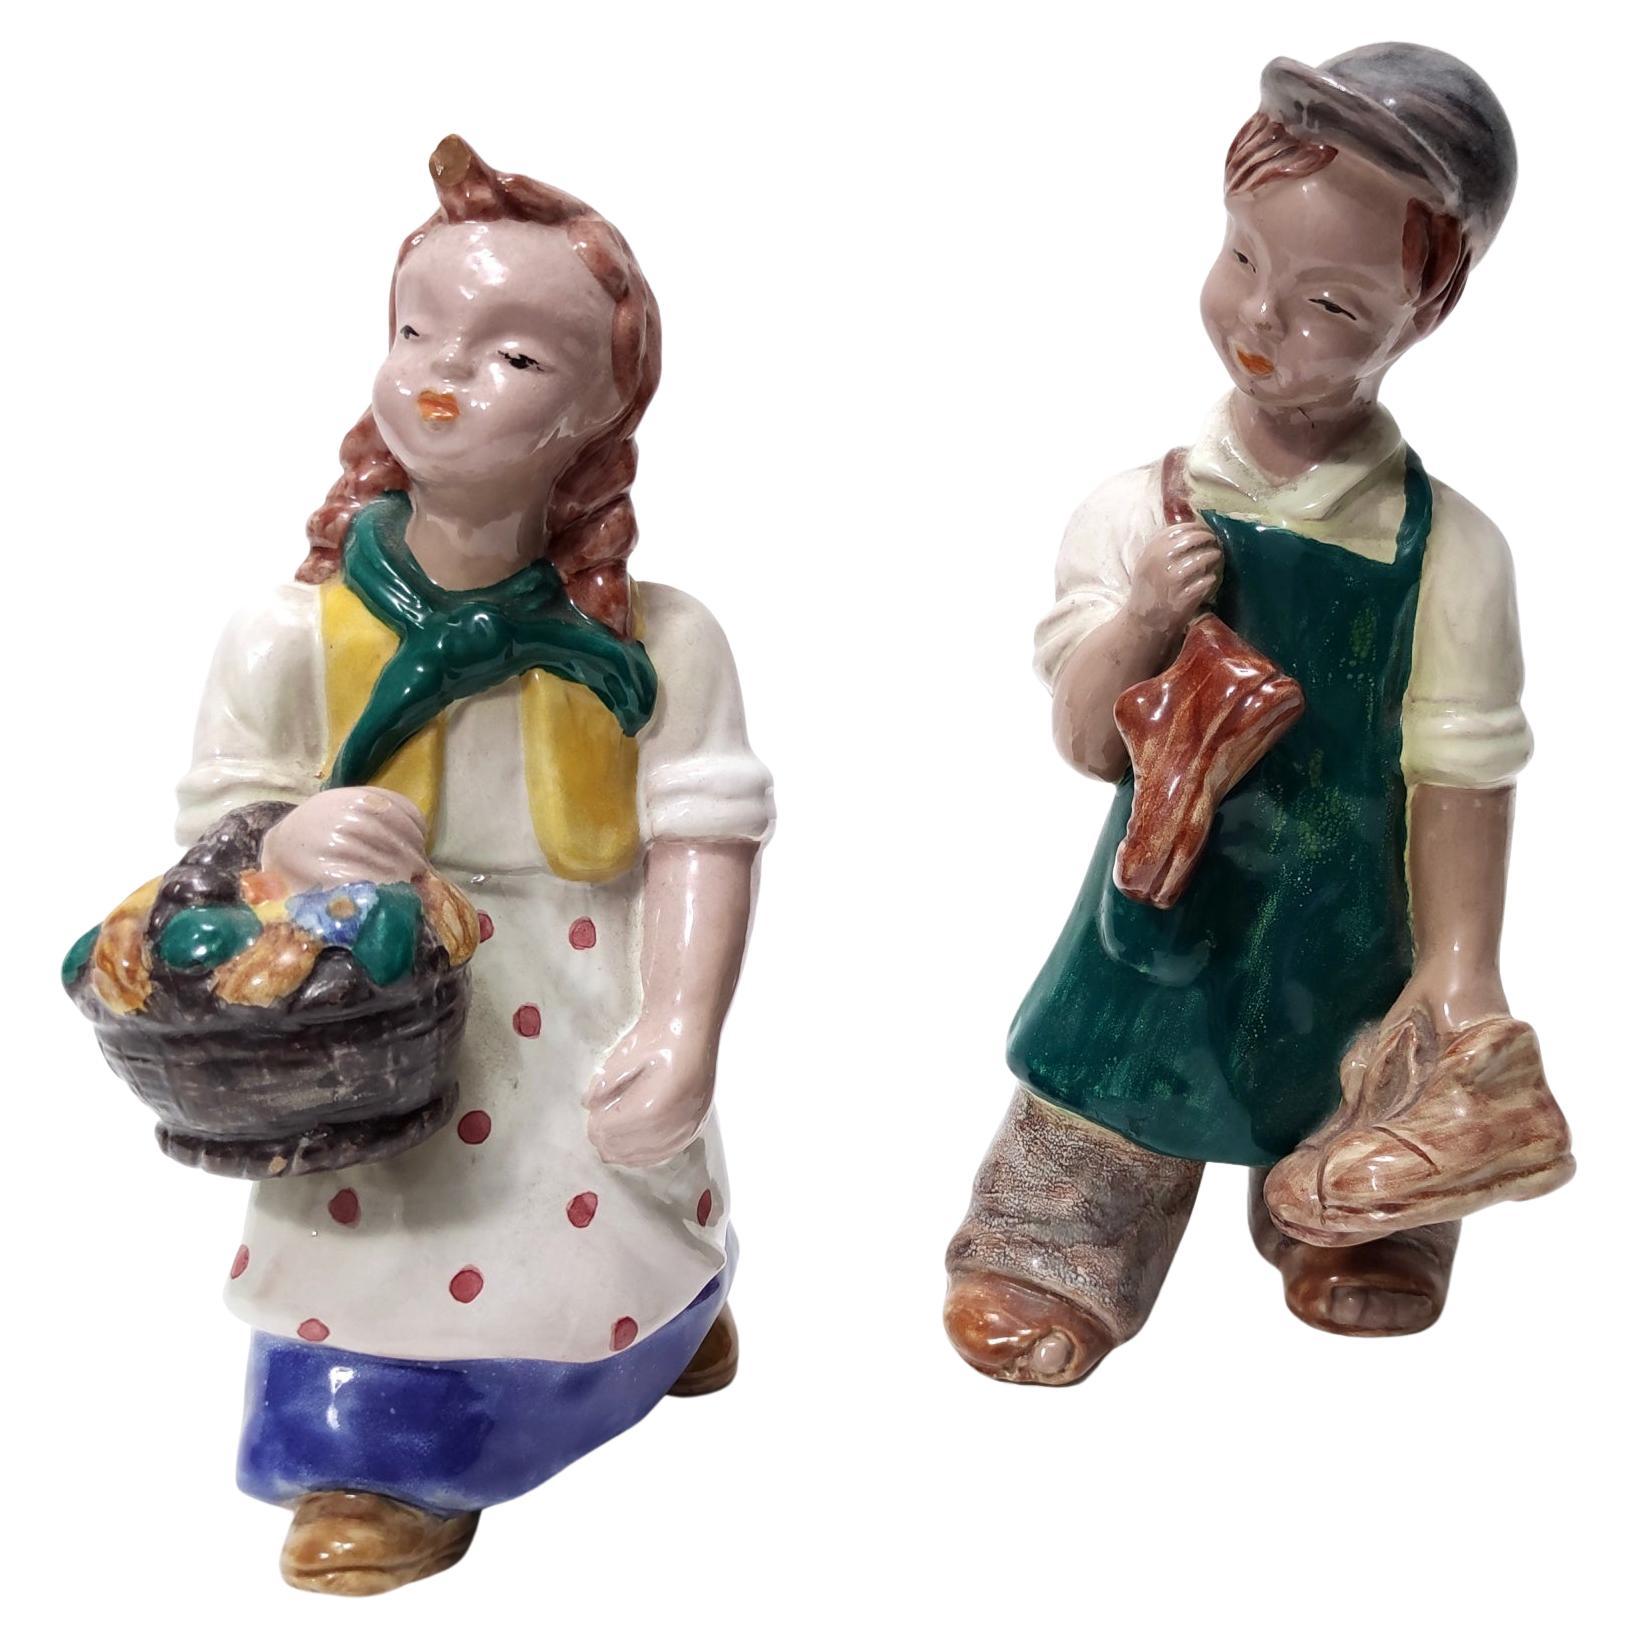 Pair of Art Deco Glazed Ceramic Figures by Hungarian Maria Rahmer